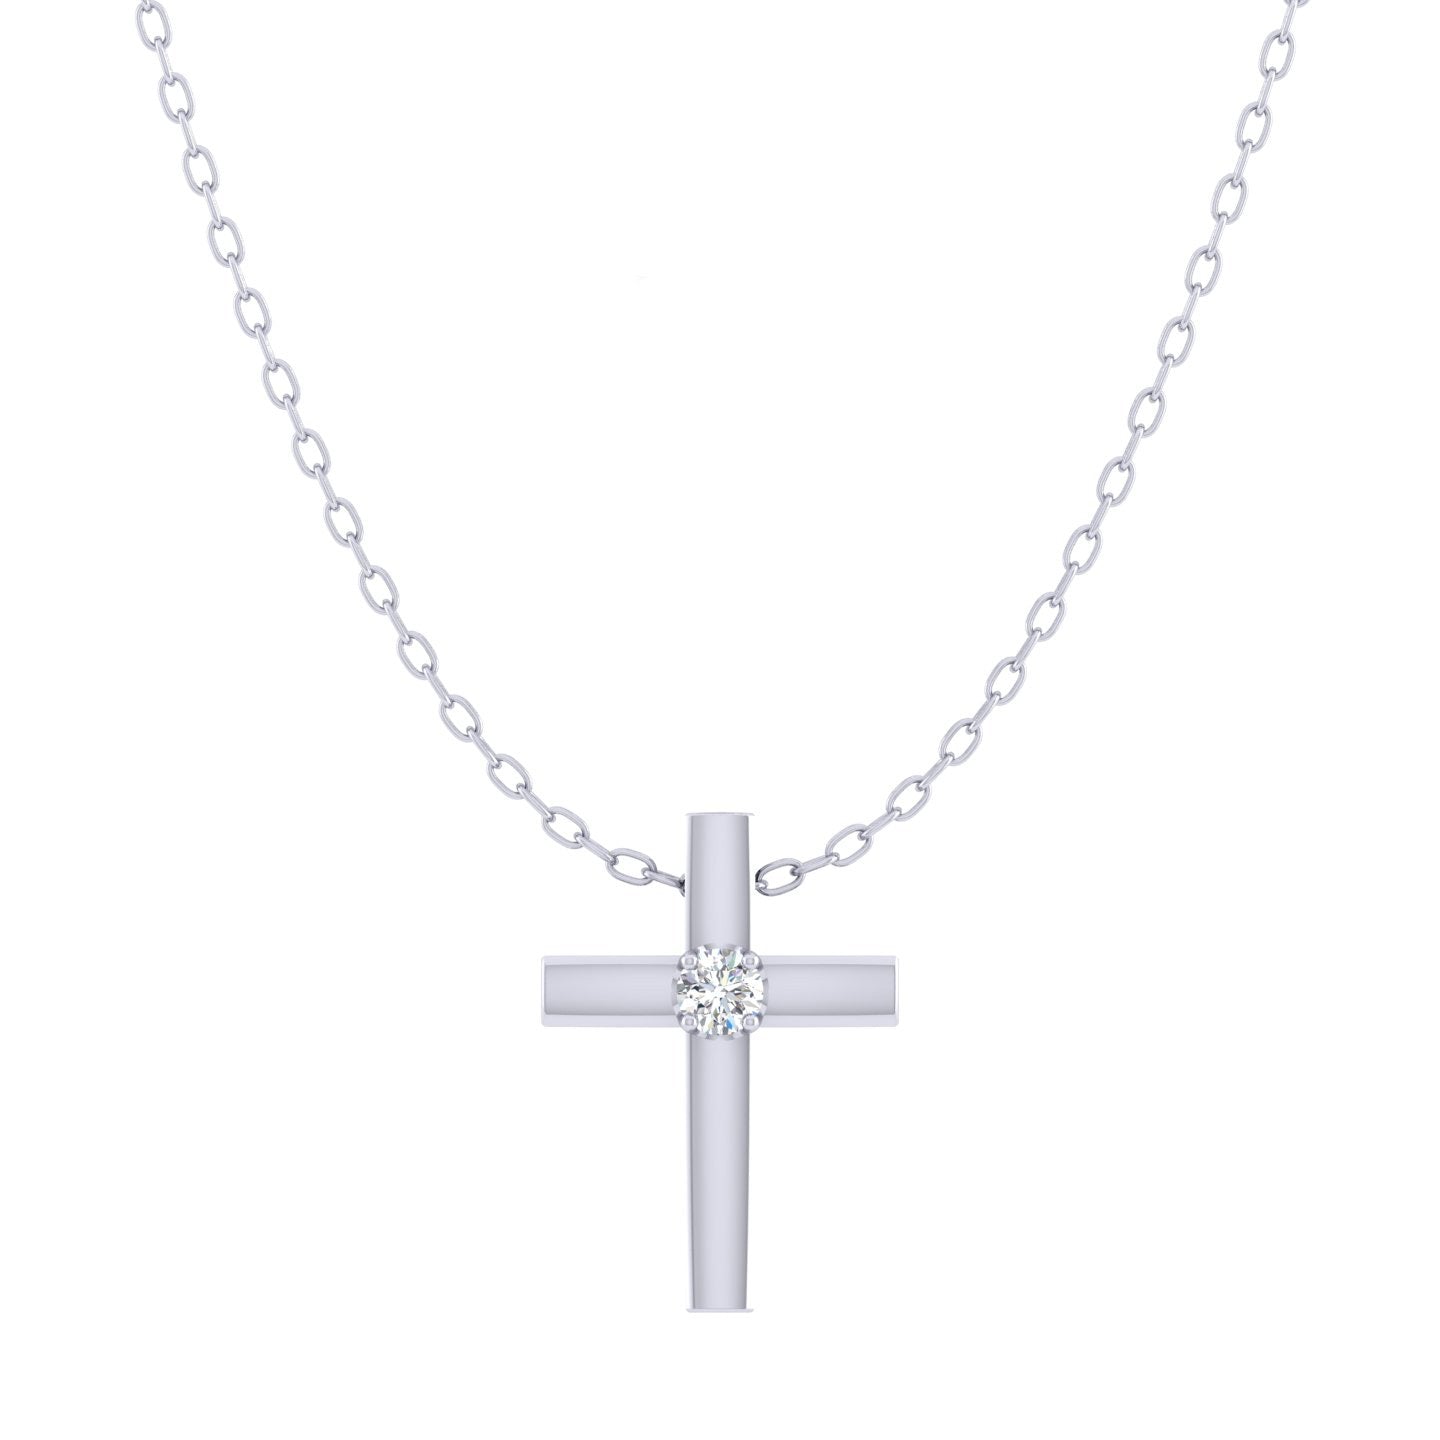 Cross 1/20 Cttw Natural Diamond Pendant Necklace set in 925 Sterling Silver